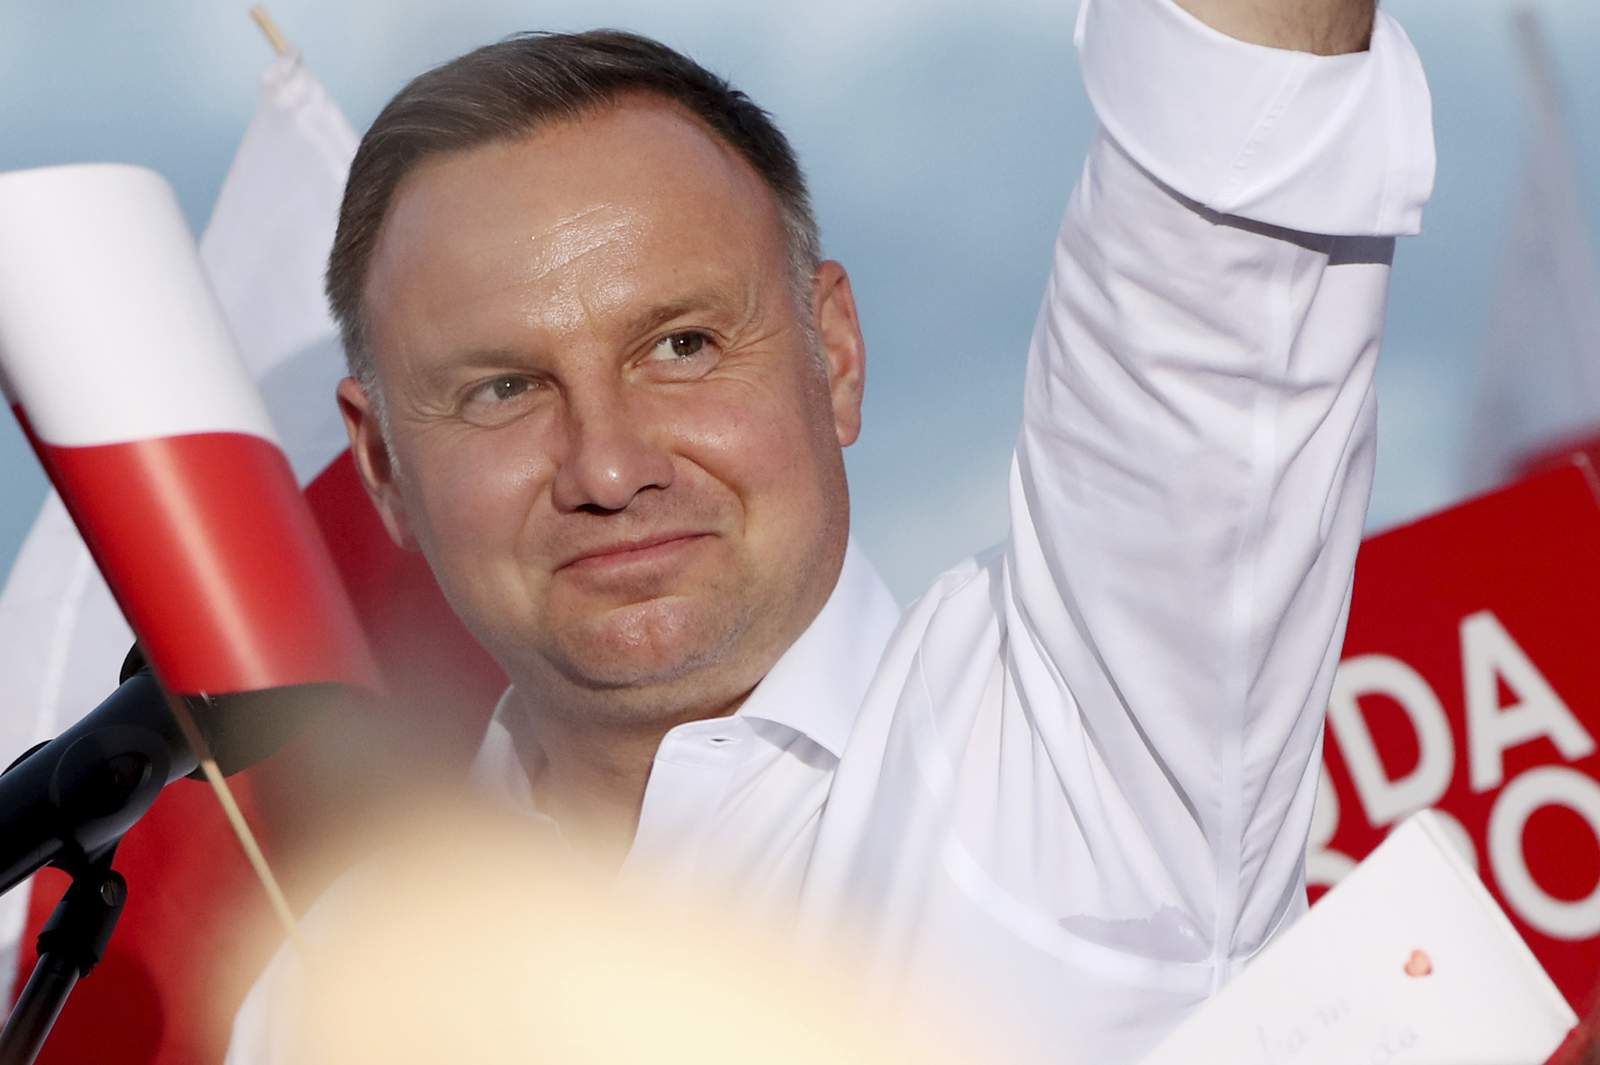 Poland holds momentous, tight presidential election runoff